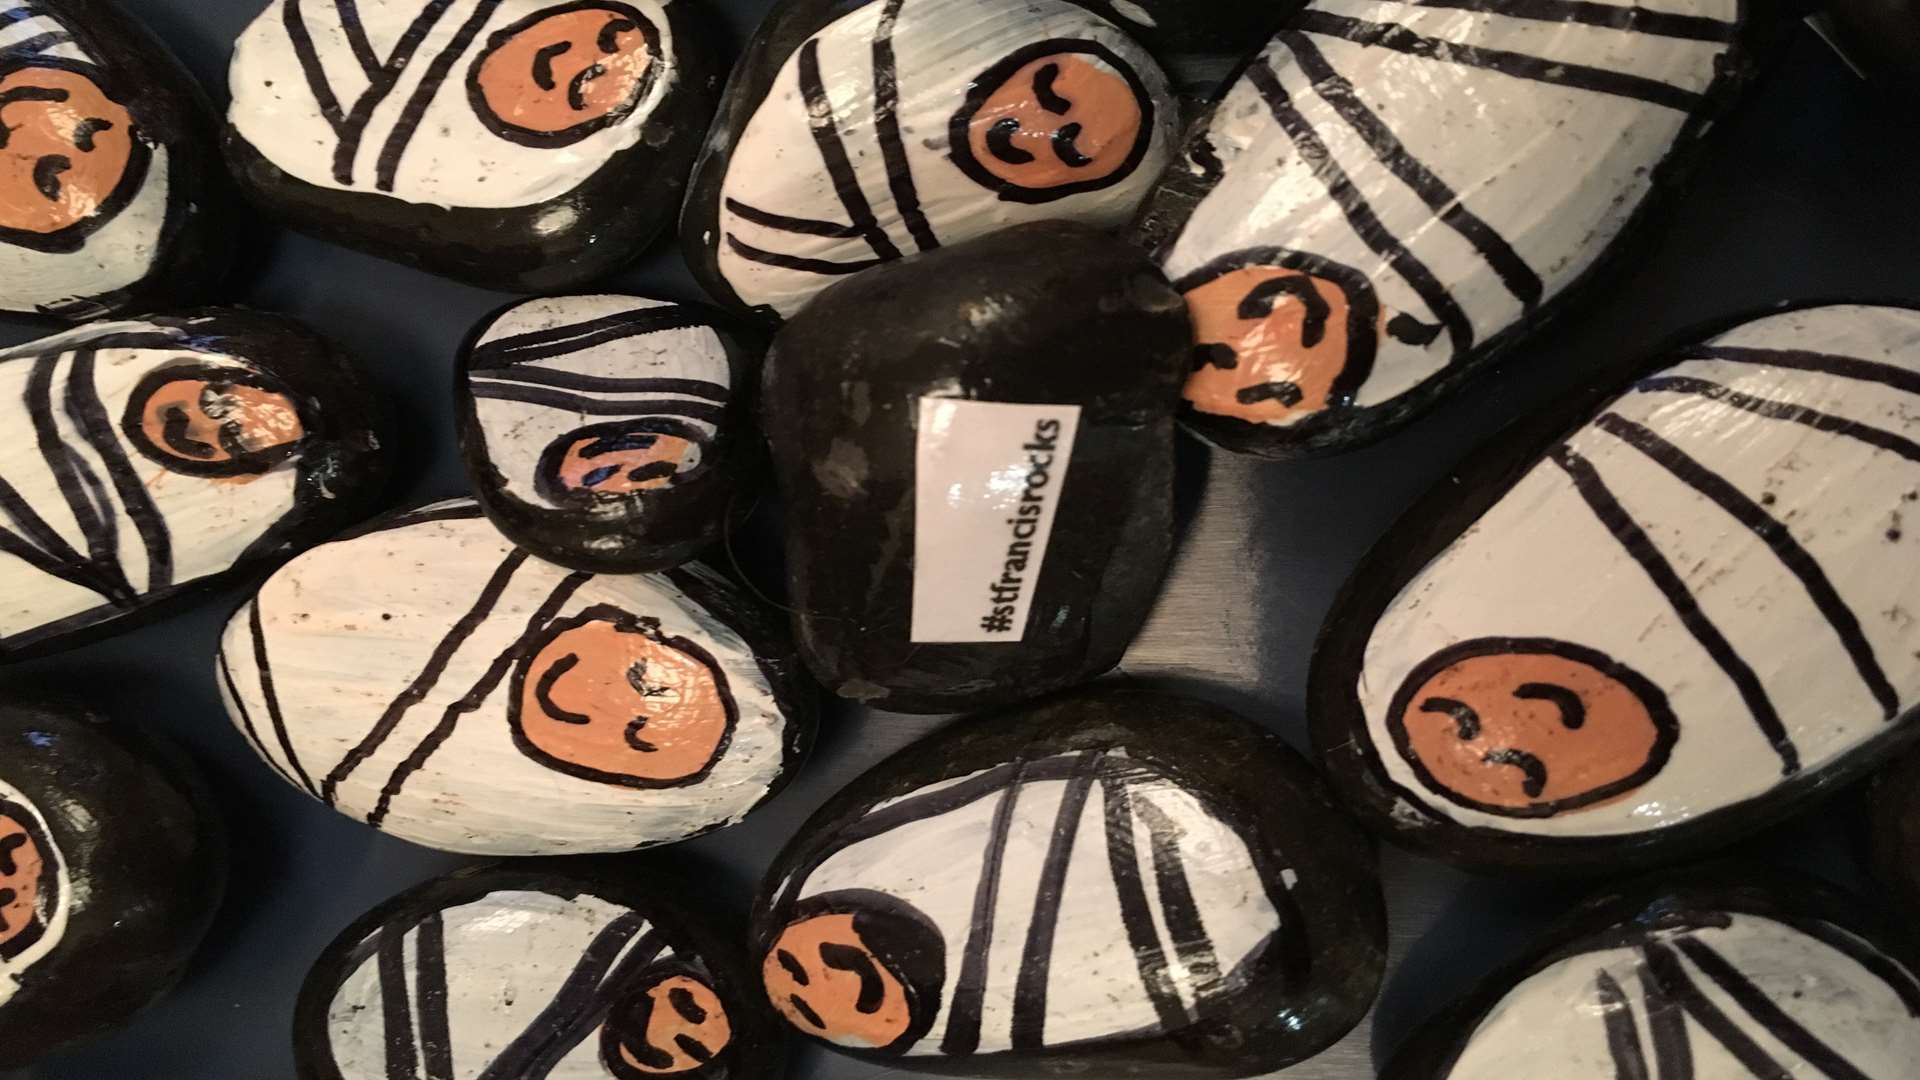 Pebbles painted to look like the baby Jesus